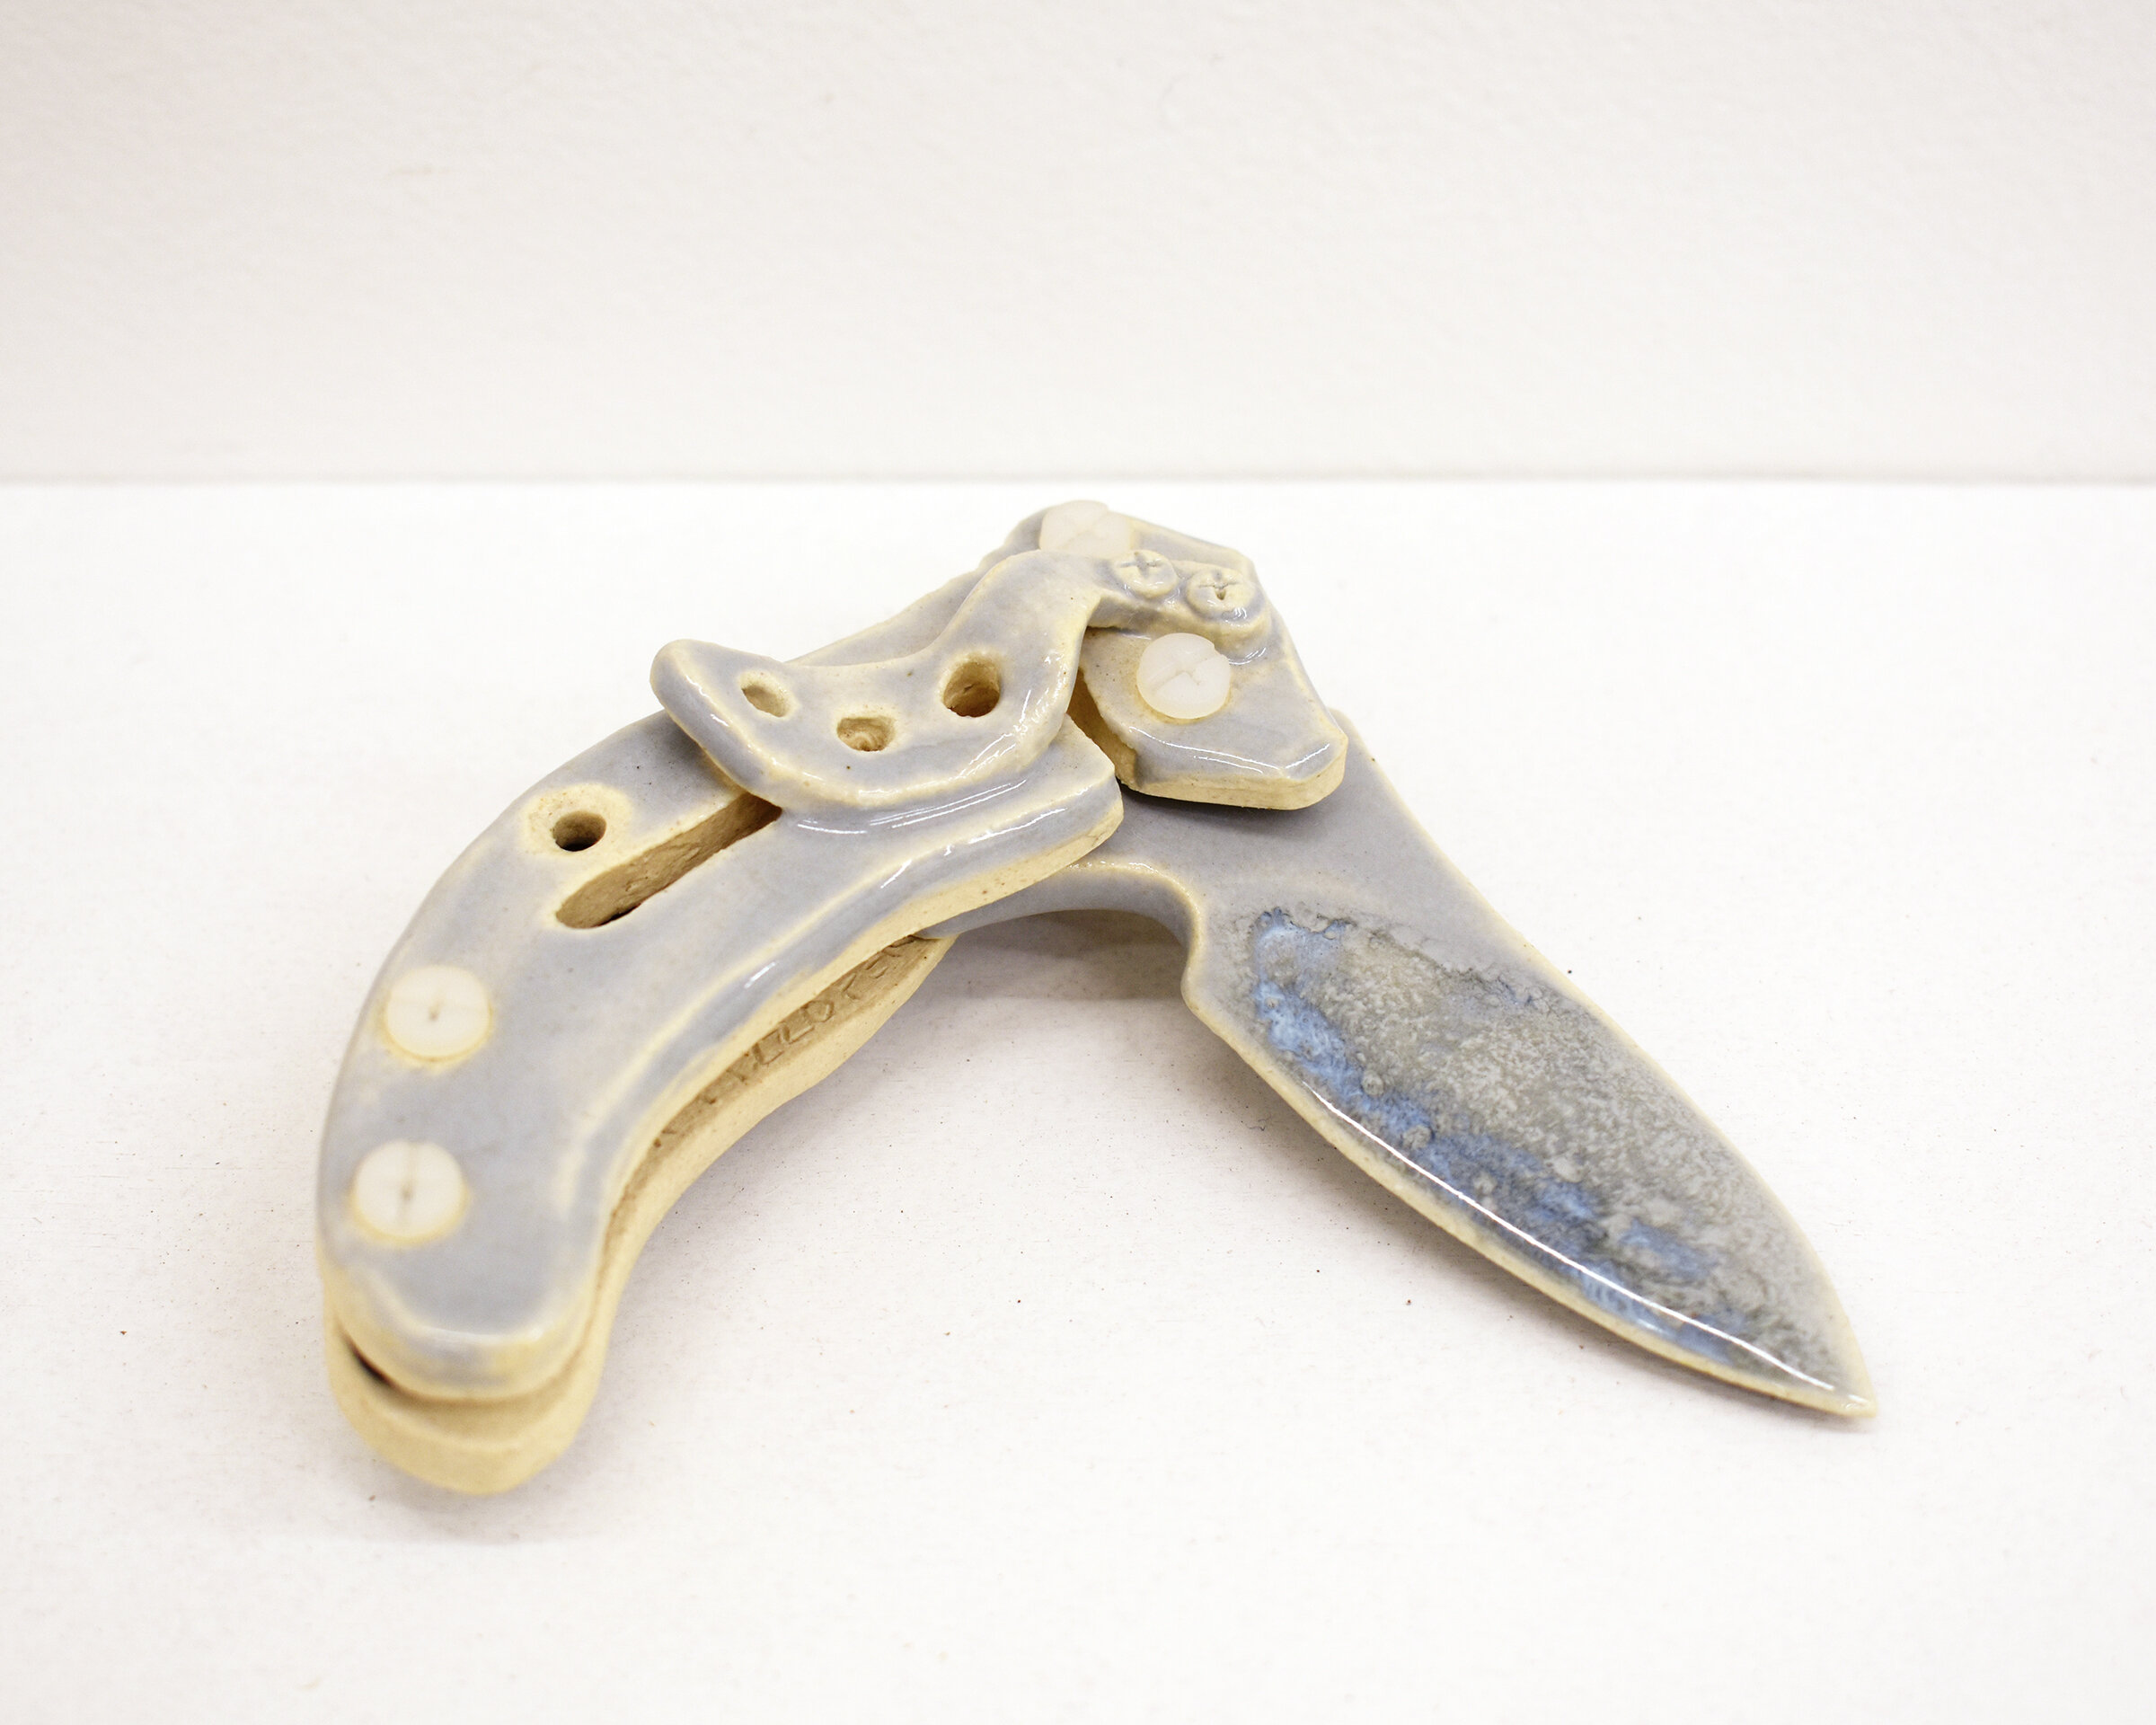  “Illusion of Self-Defense : Kershaw Replica (Assisted-Opening Pocket Knife” Closed- 1” x 2” x 4.5”, Open - 1” x 2” x 7”, Blade Length - 3”. Stoneware in 4 parts (white and brown clay bodies), vinyl screws and nuts, various glazes, 2021. 